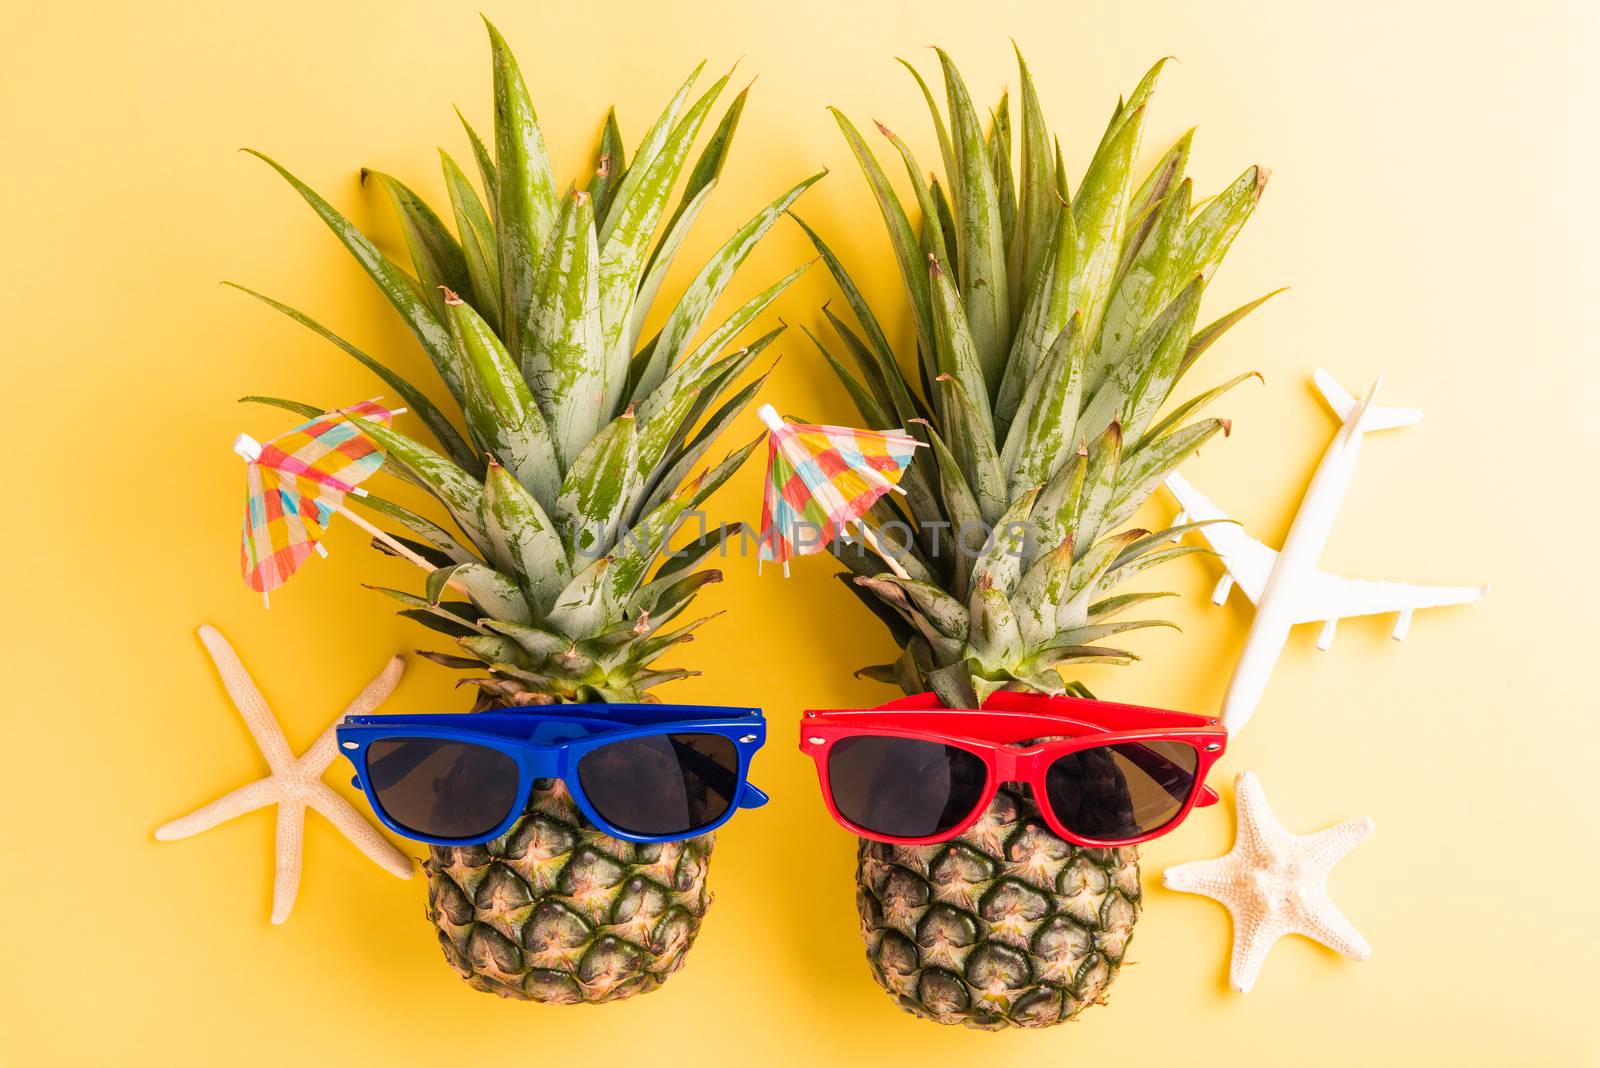 Celebrate Summer Pineapple Day Concept, Top view flat lay of funny two pineapples in sunglasses with model plane and starfish, studio shot isolated on yellow background, Holiday summertime in tropical